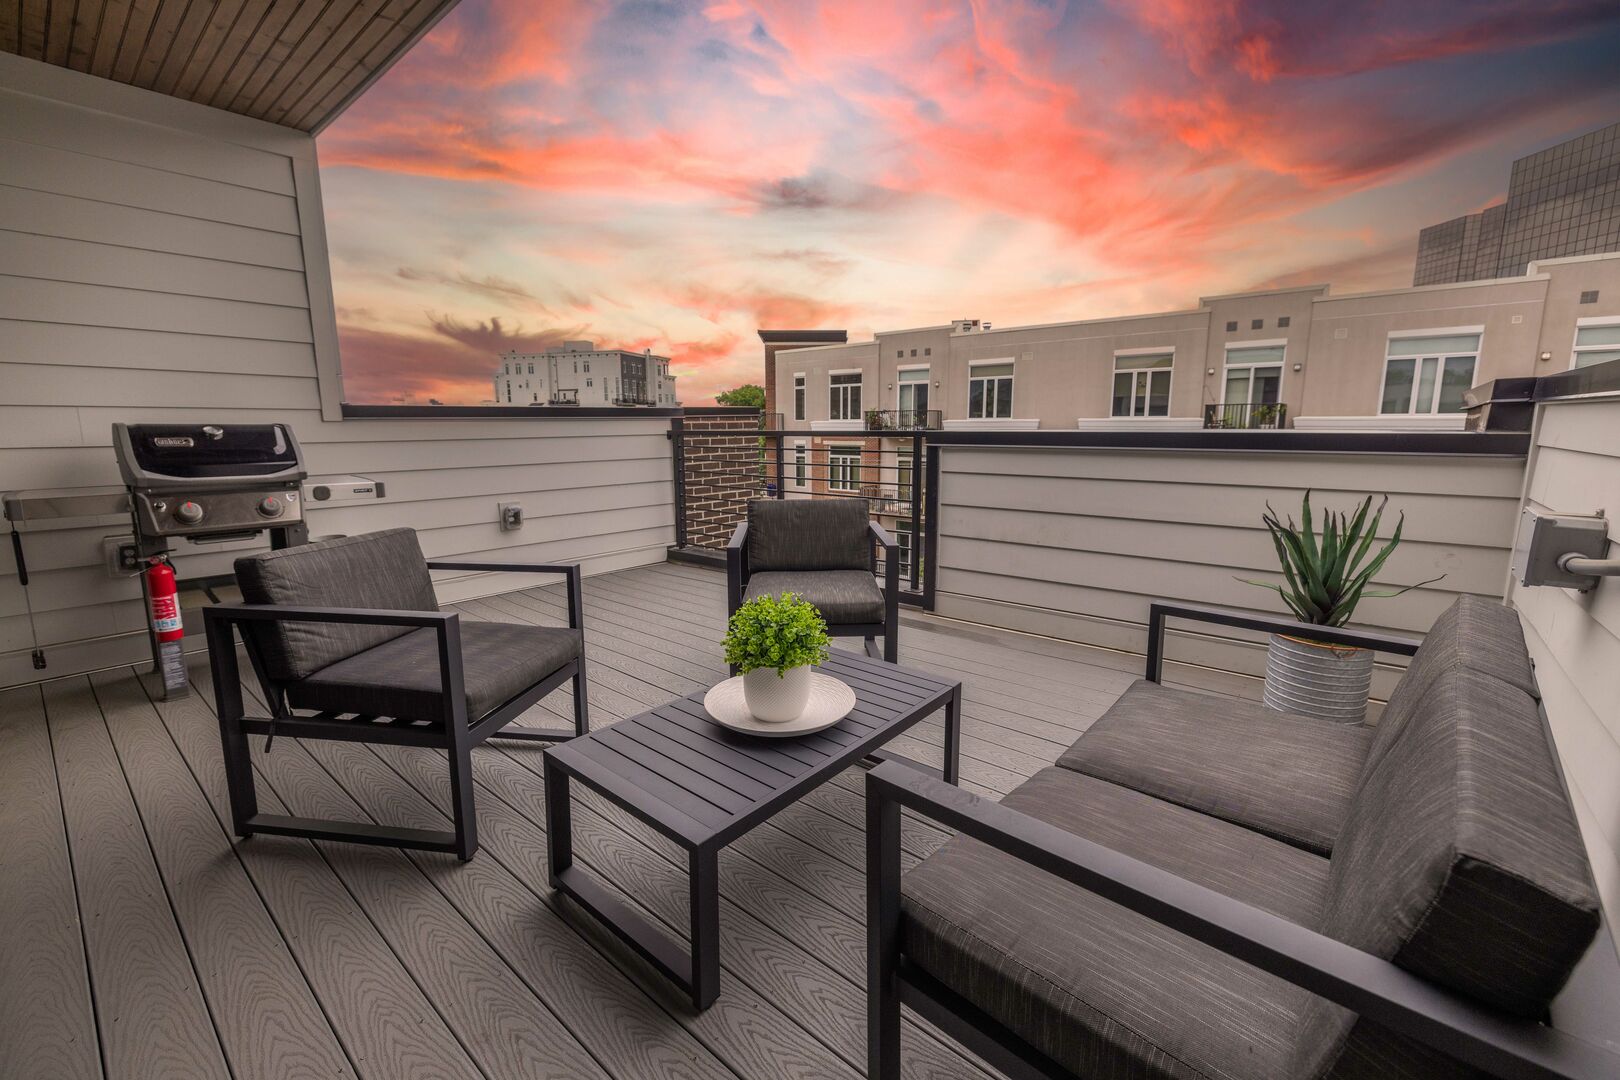 (1st Unit): Private rooftop patio with BBQ grill, lounge area, and incredible views of downtown.